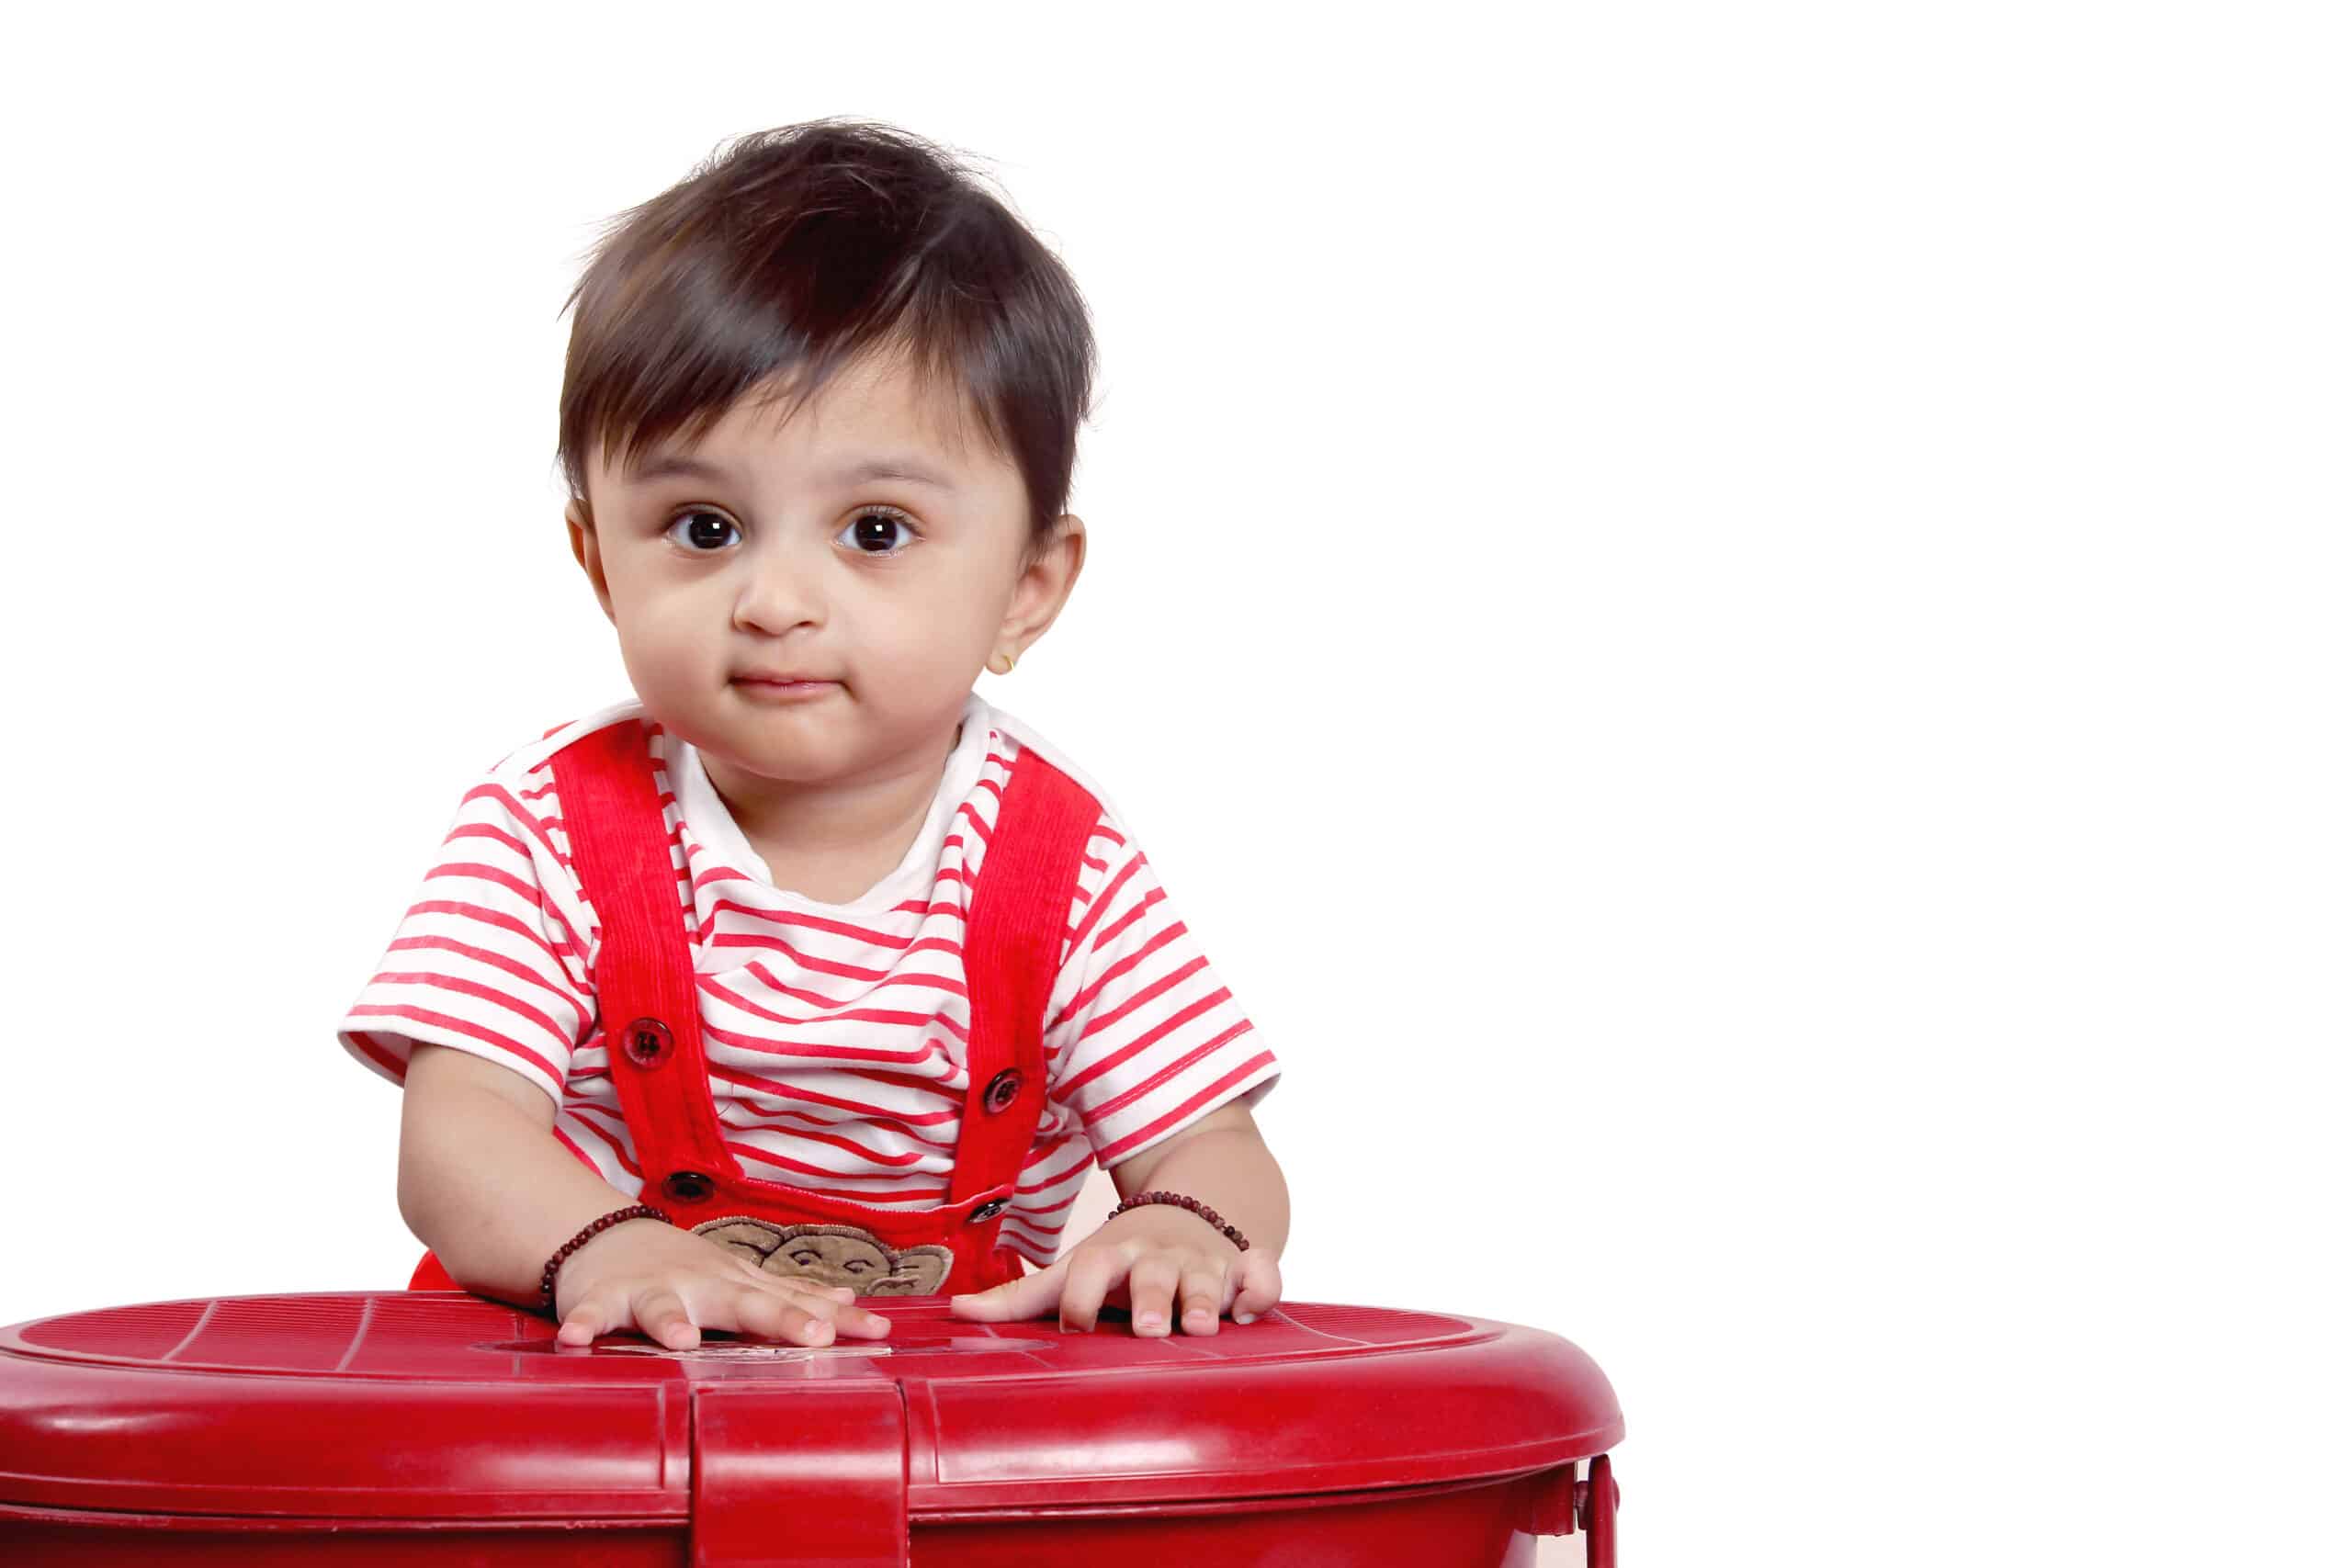 Indian Baby on red t-shirt